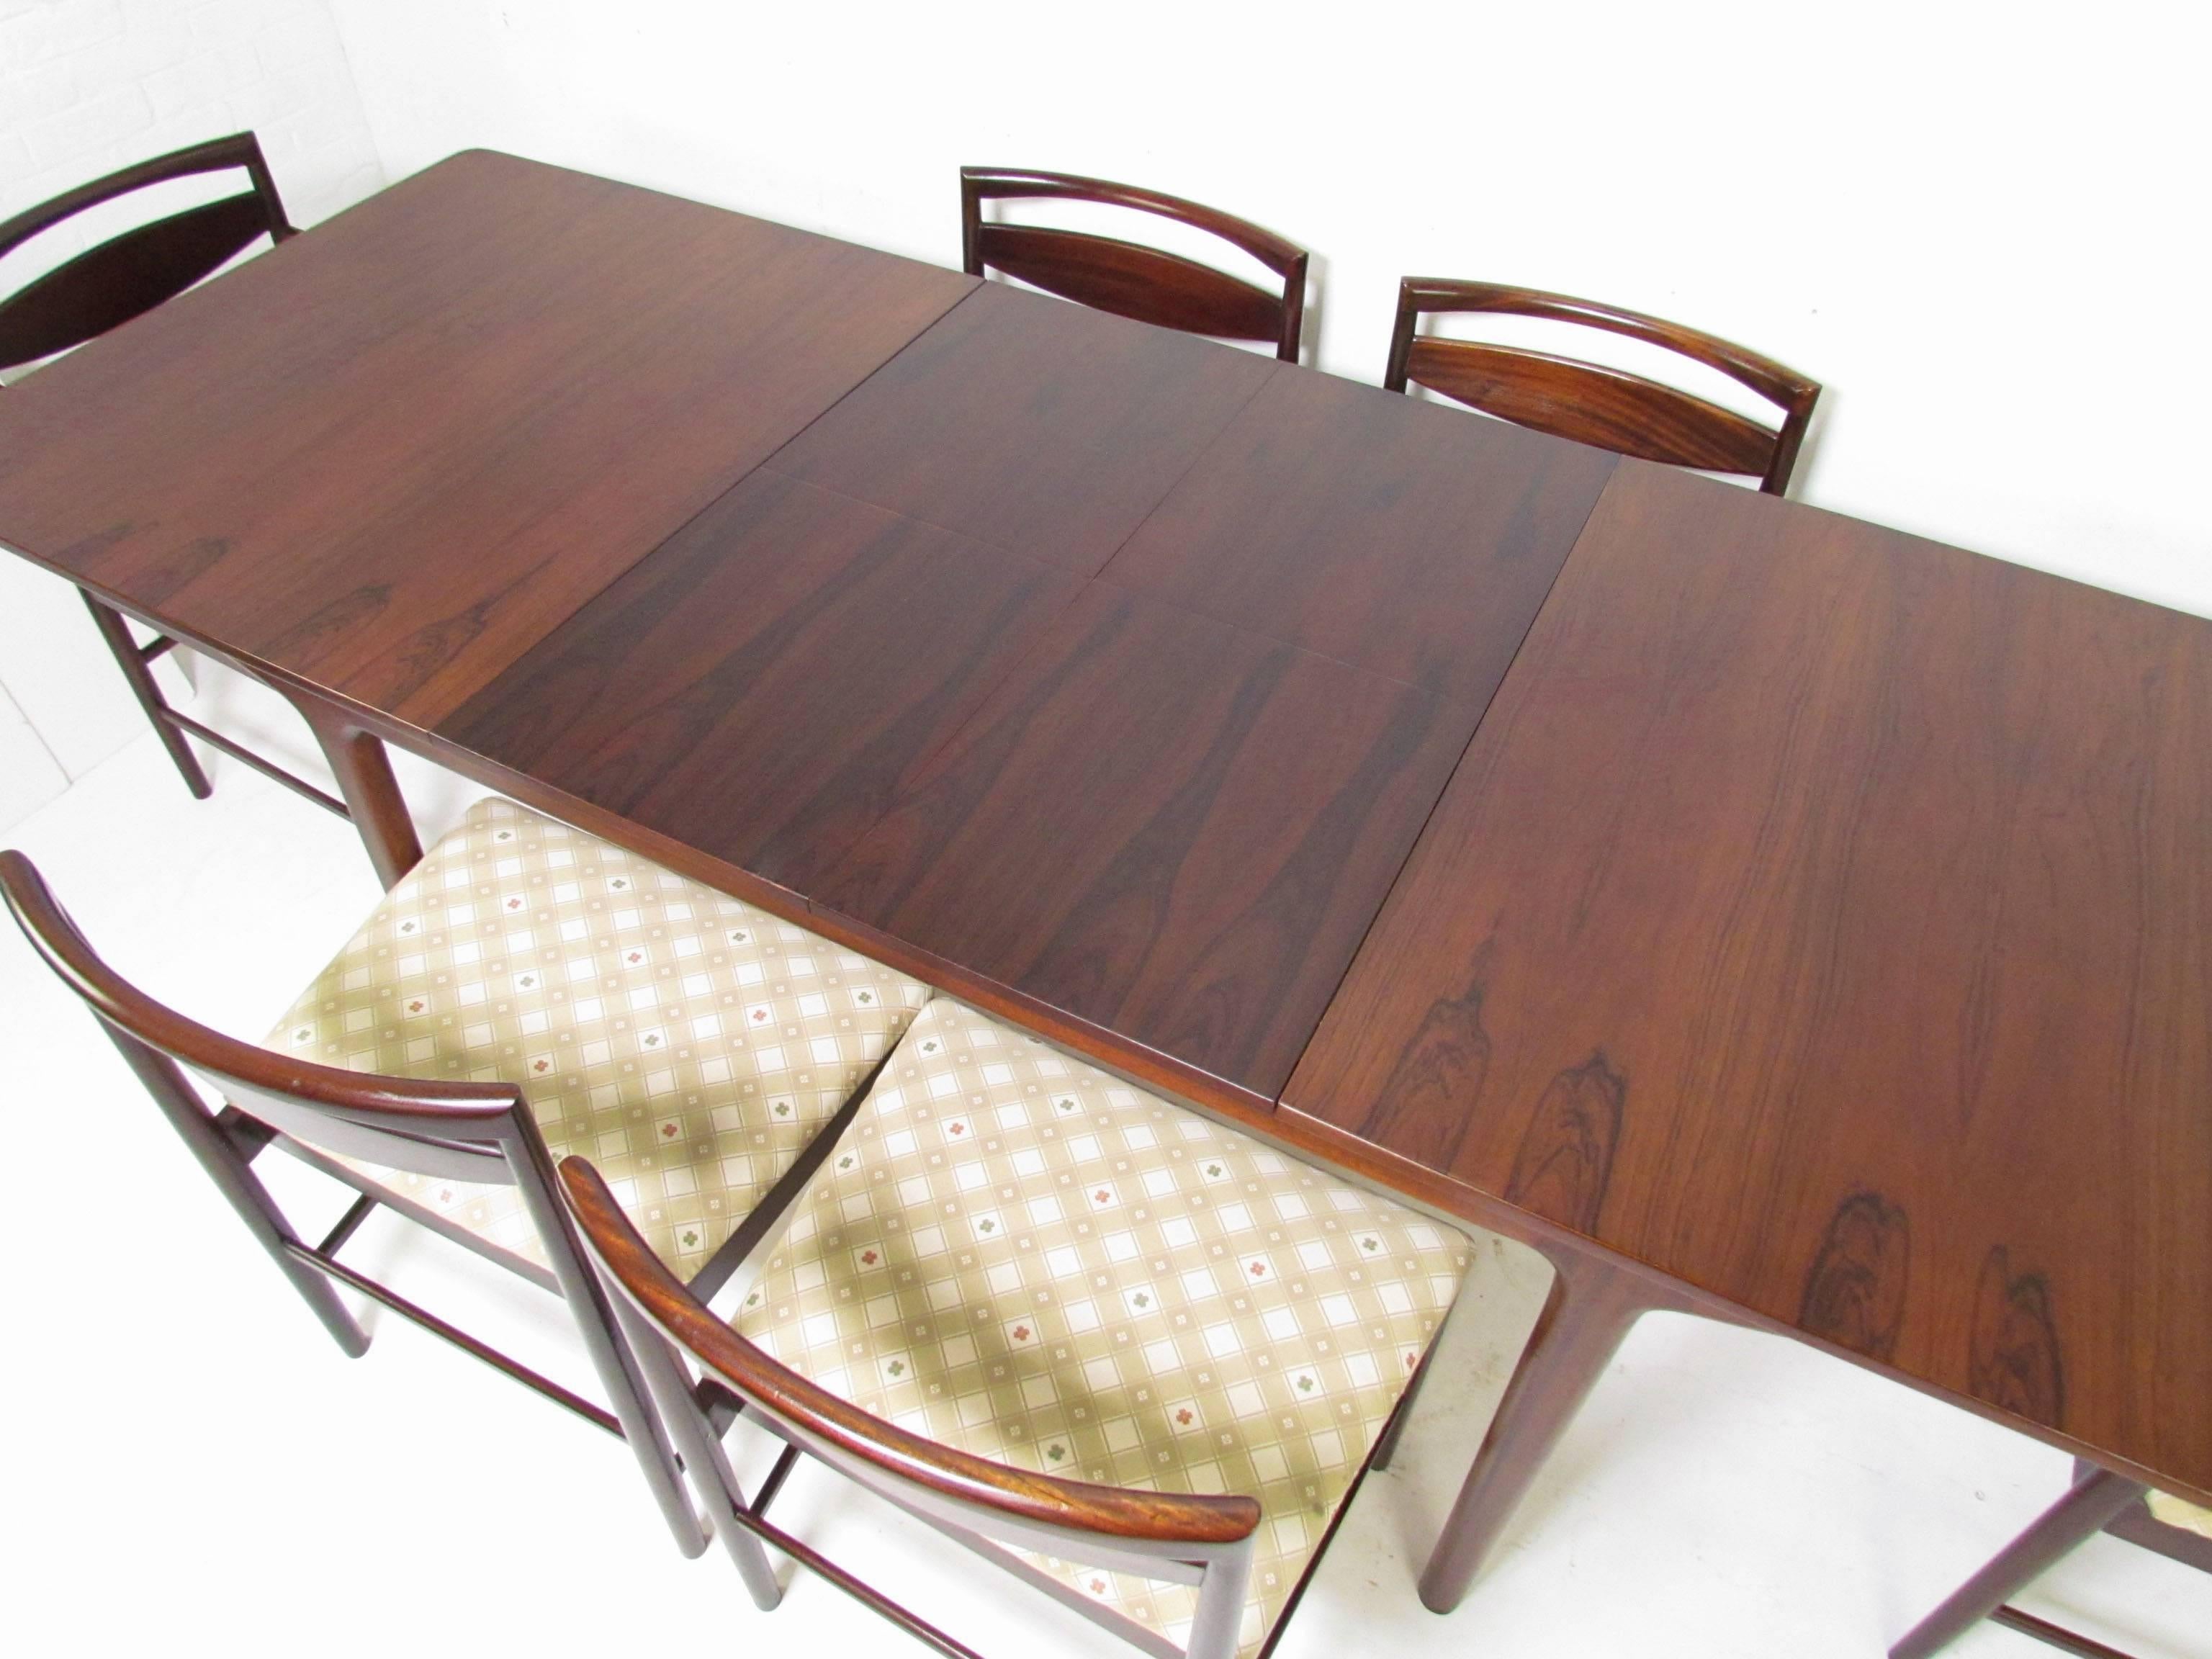 Scandinavian Modern Danish Modern Rosewood Dining Set, Table and Six Chairs, by A.H. McIntosh